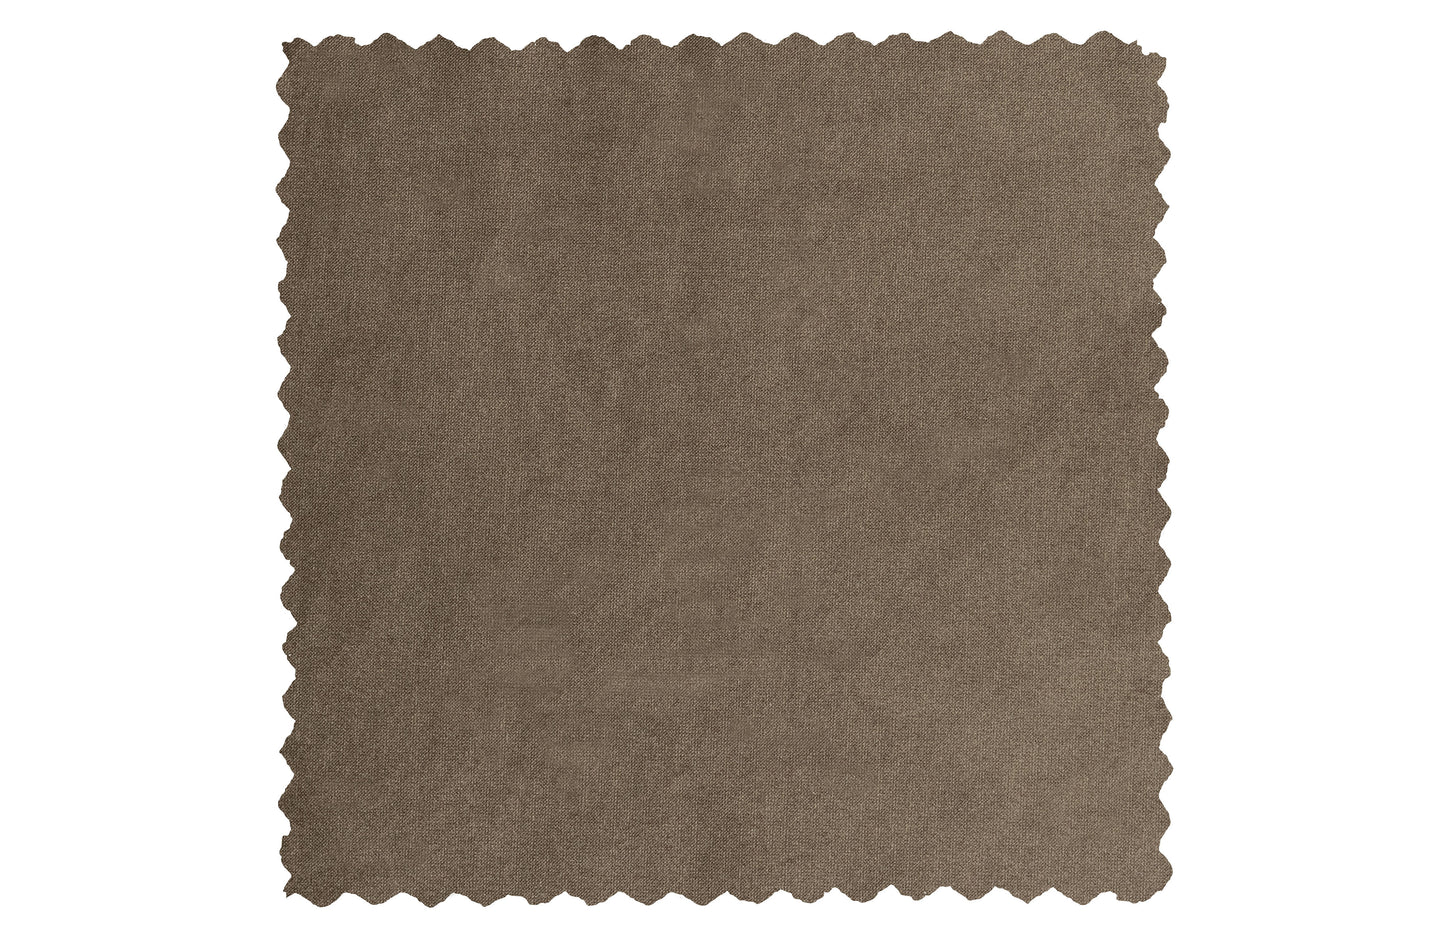 BEPUREHOME | Statement - 4-personers soffa, 280 Cm Velour Taupe